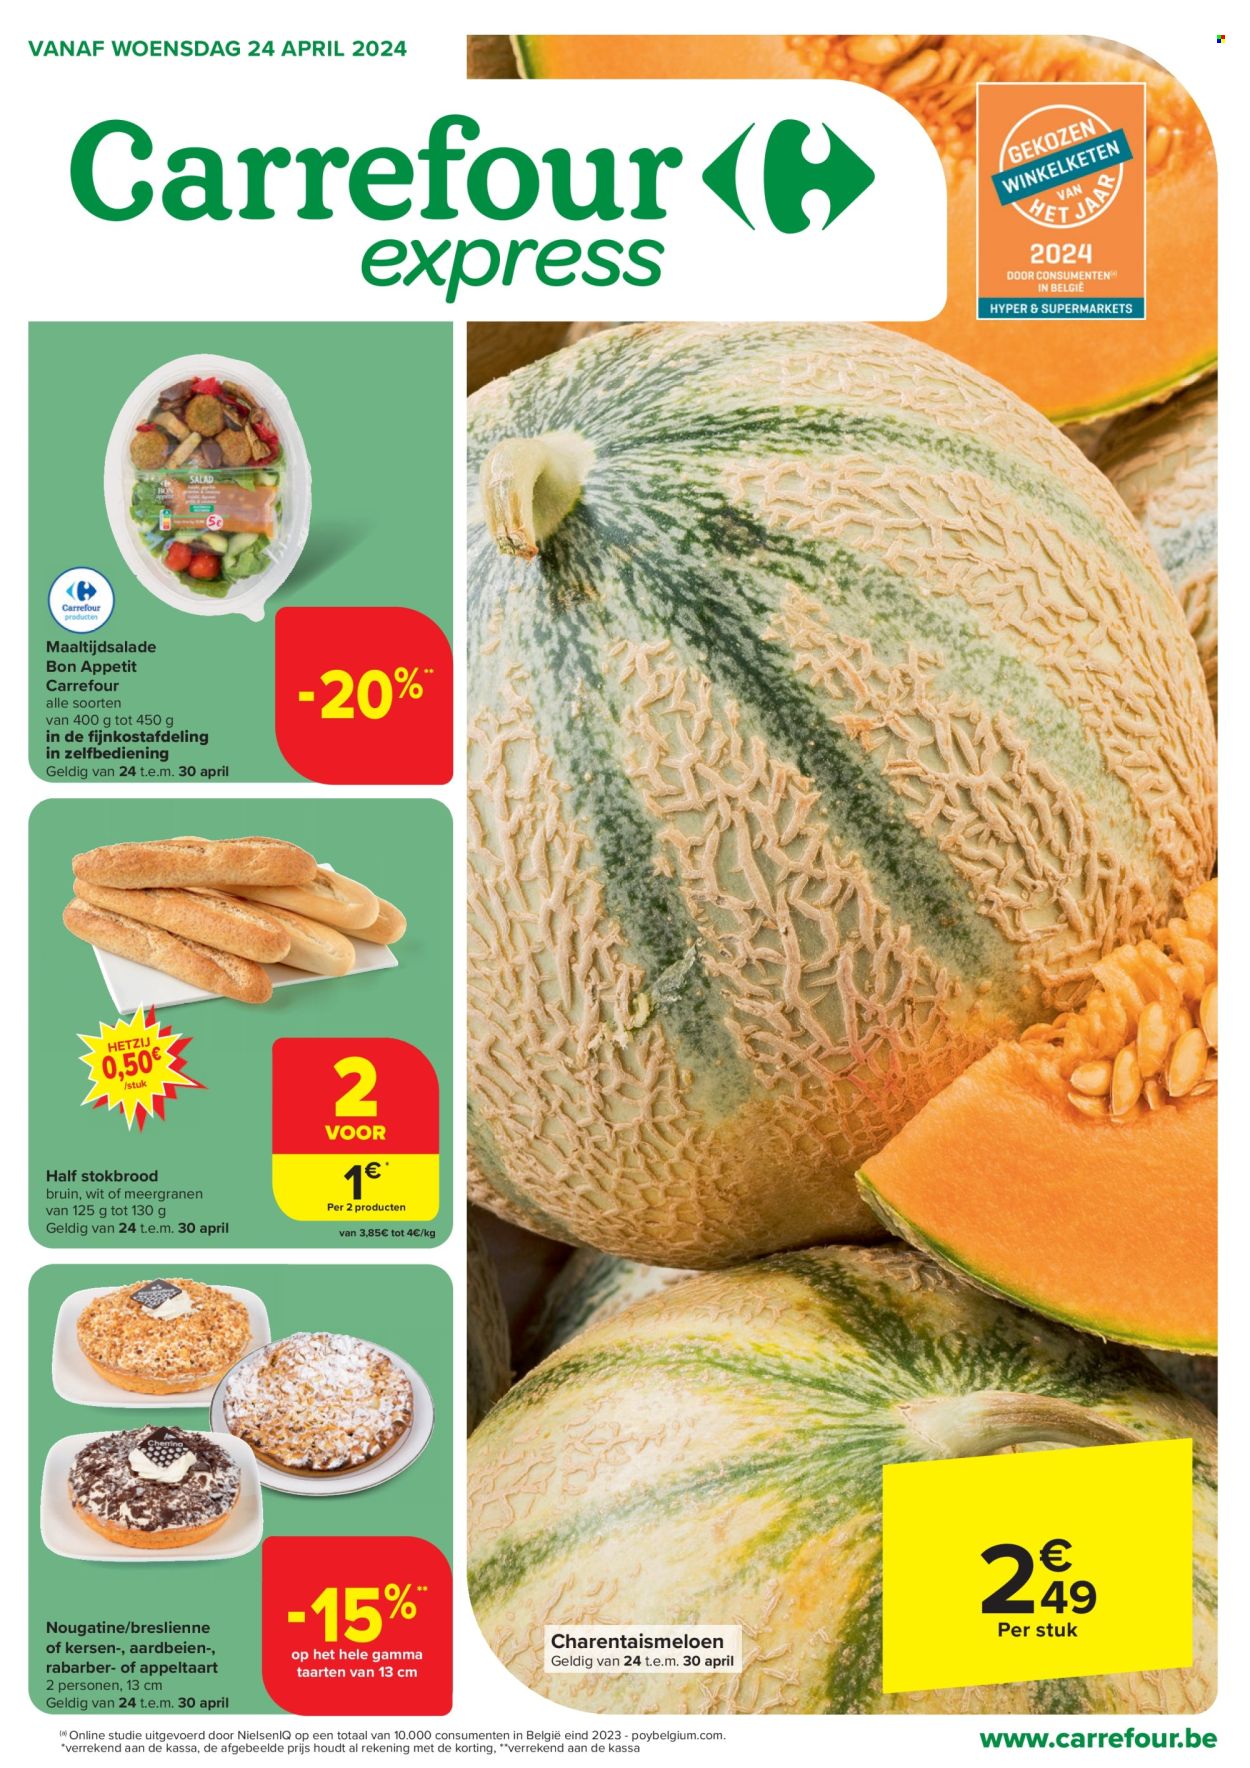 Catalogue Carrefour express - 24.4.2024 - 30.4.2024. Page 1.